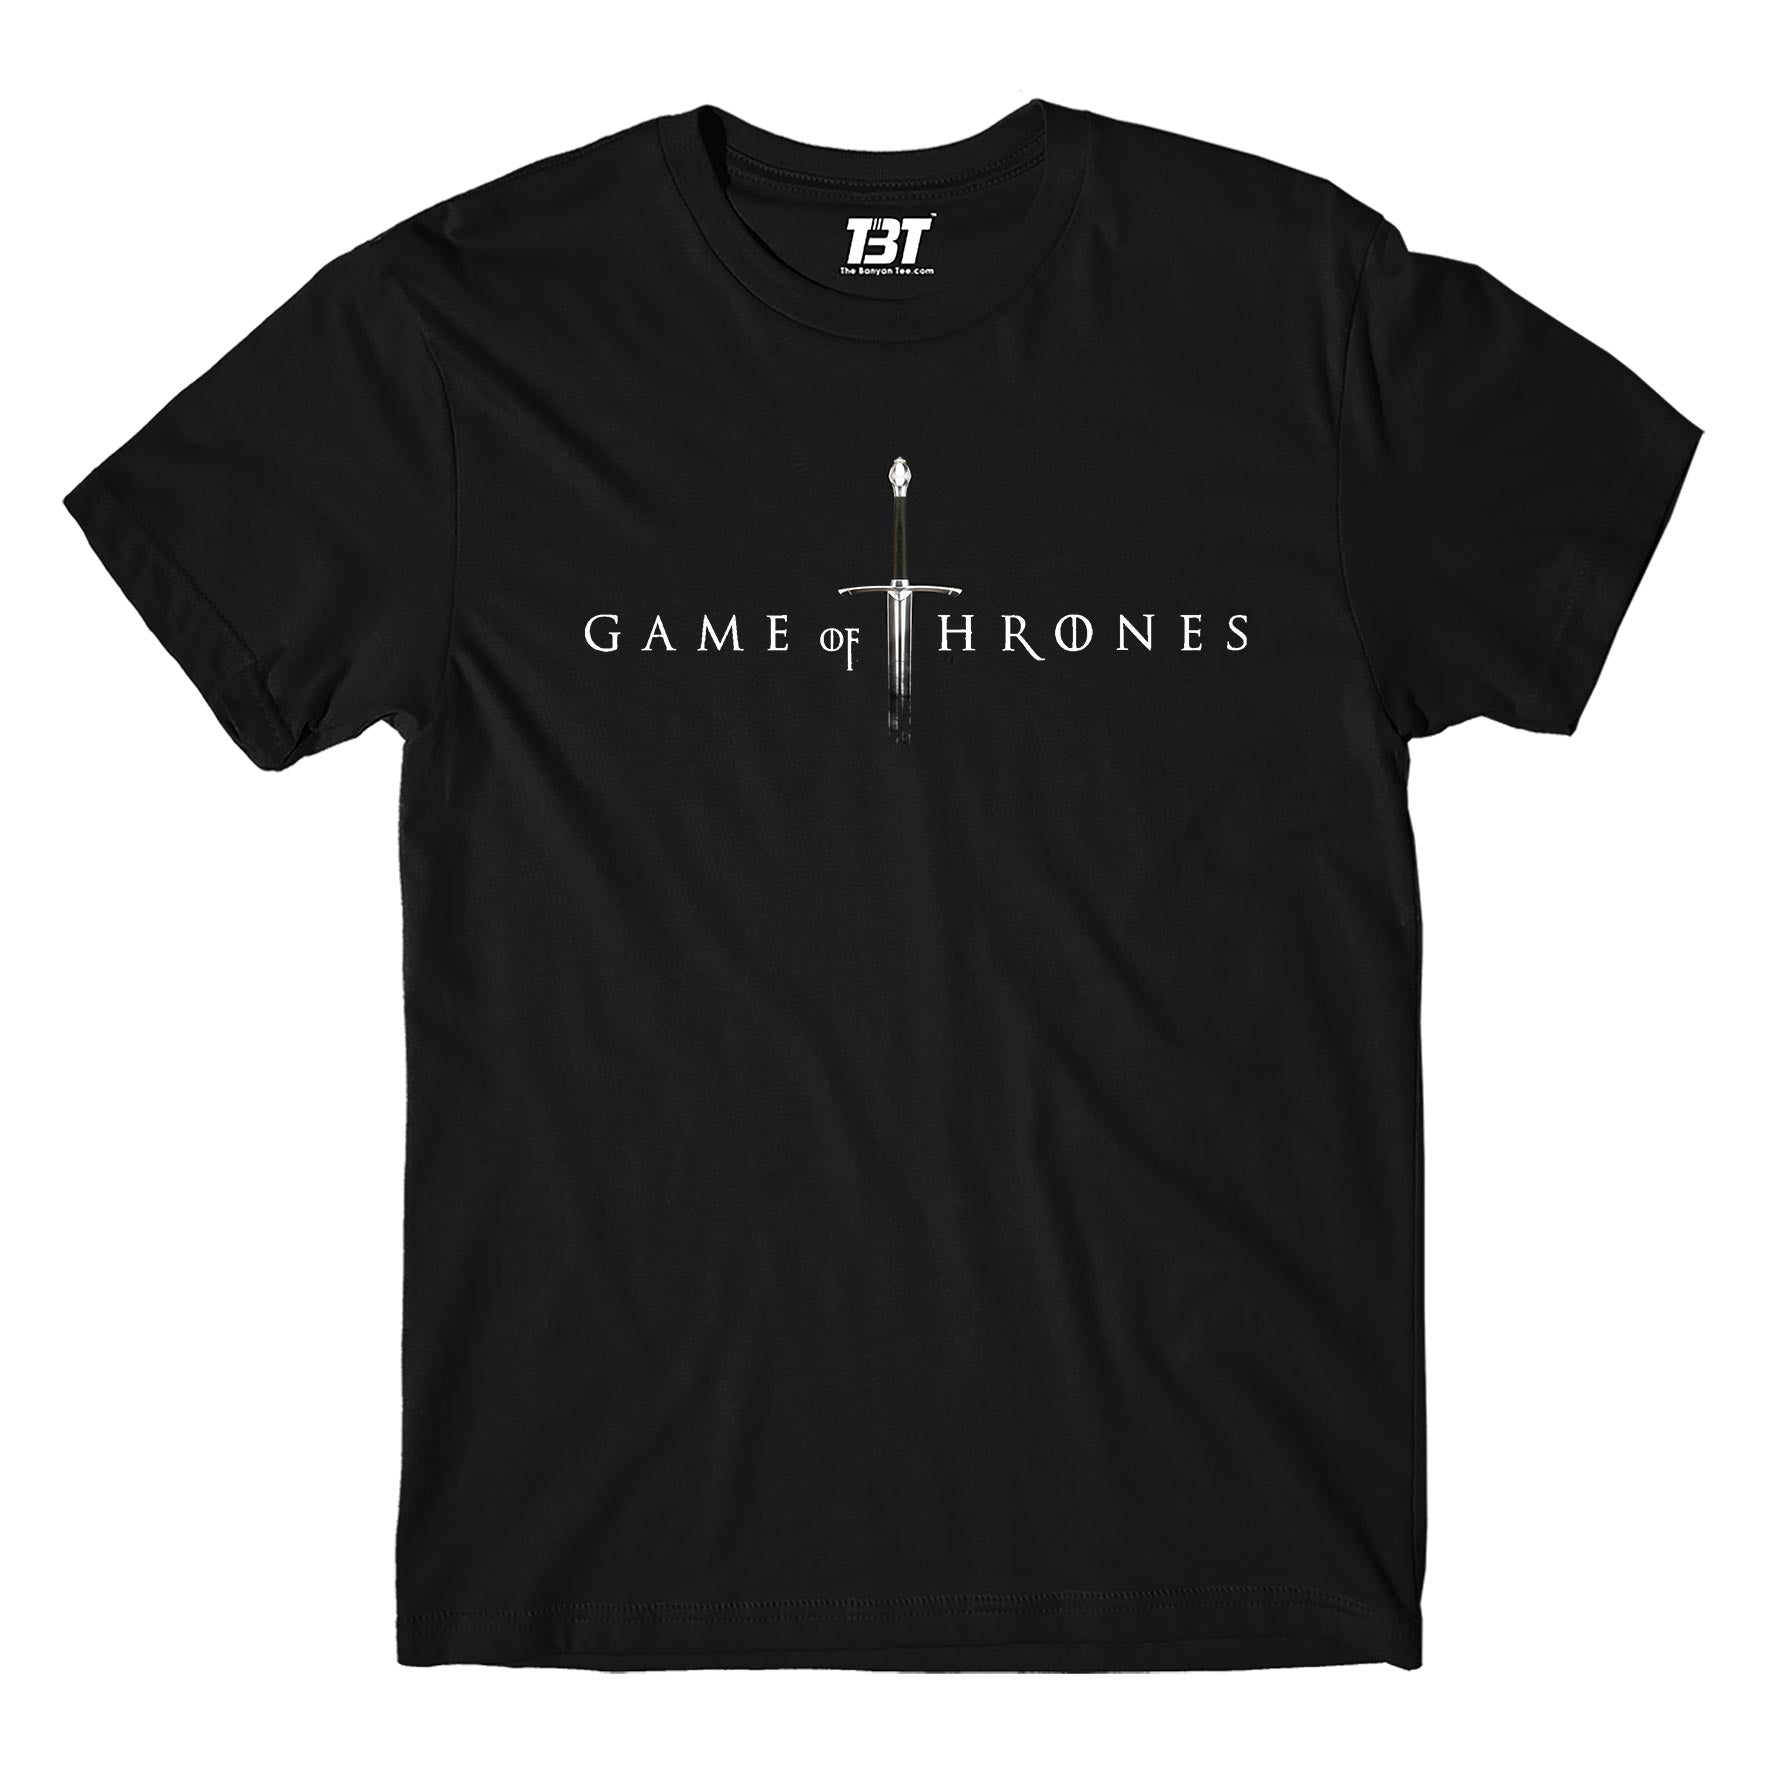 the banyan tee merch on sale Game of Thrones T shirt - On Sale - 6XL (Chest size 56 IN)